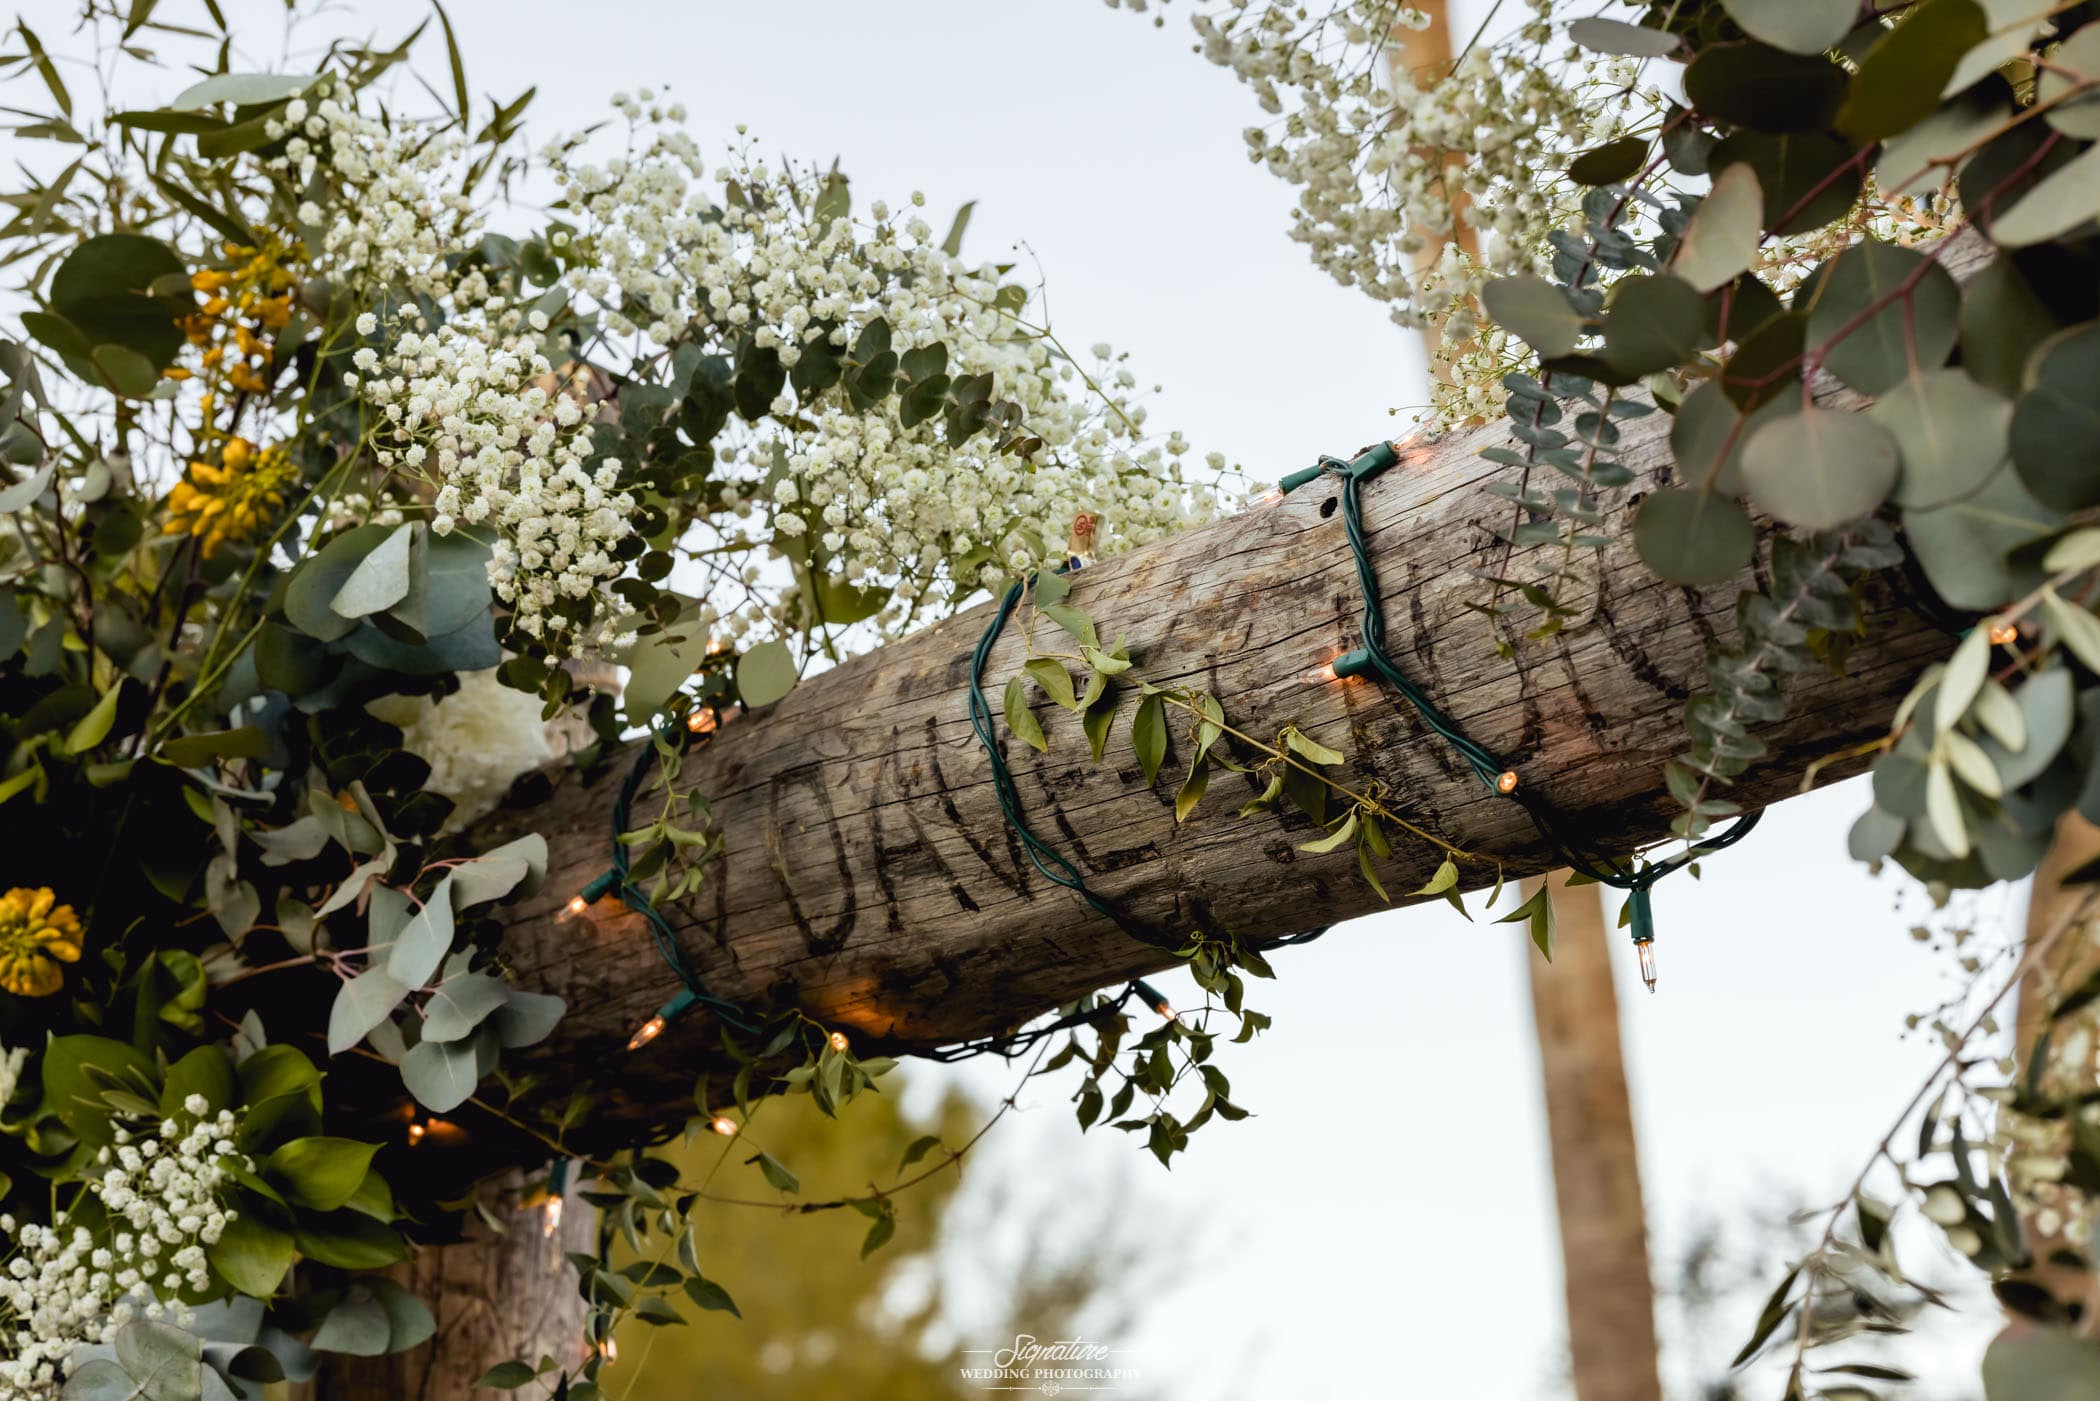 Names carved on tree with flowers and lights